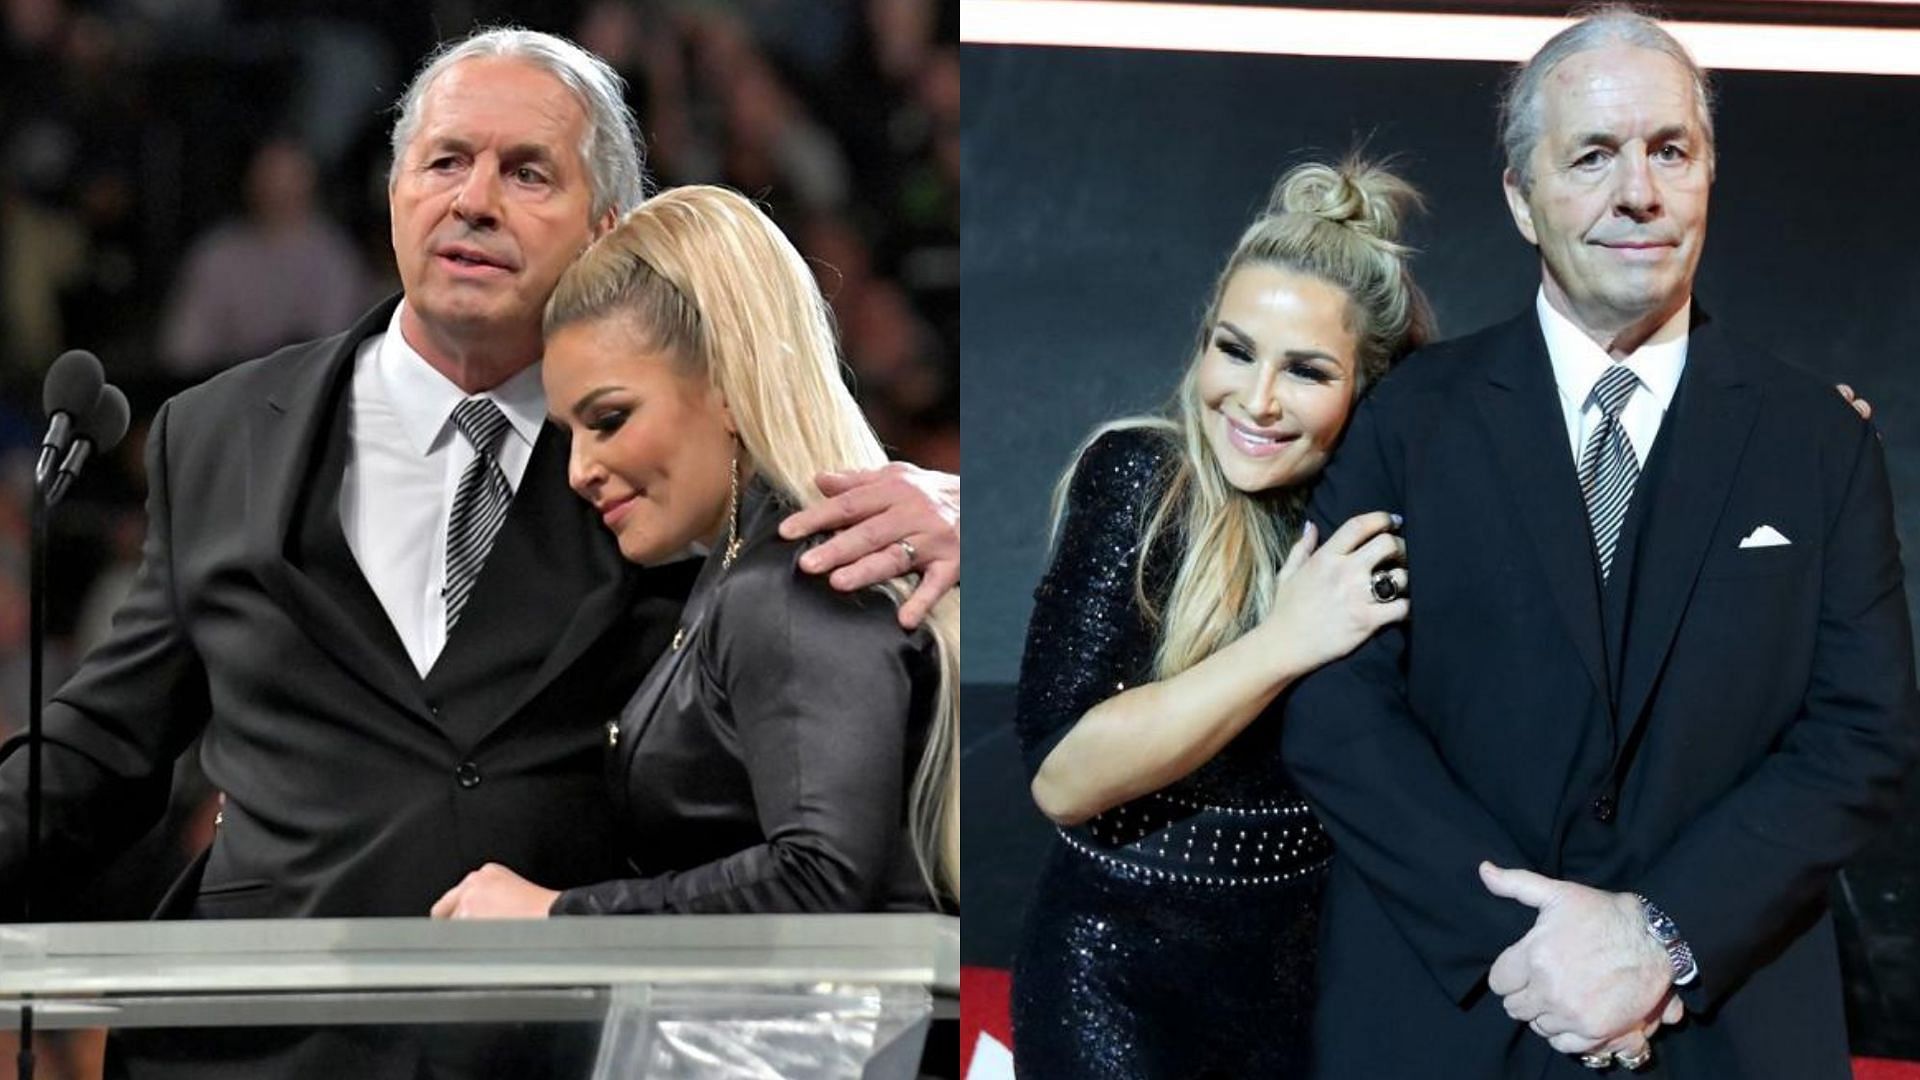 Read on to find out if Natalya is Bret Hart